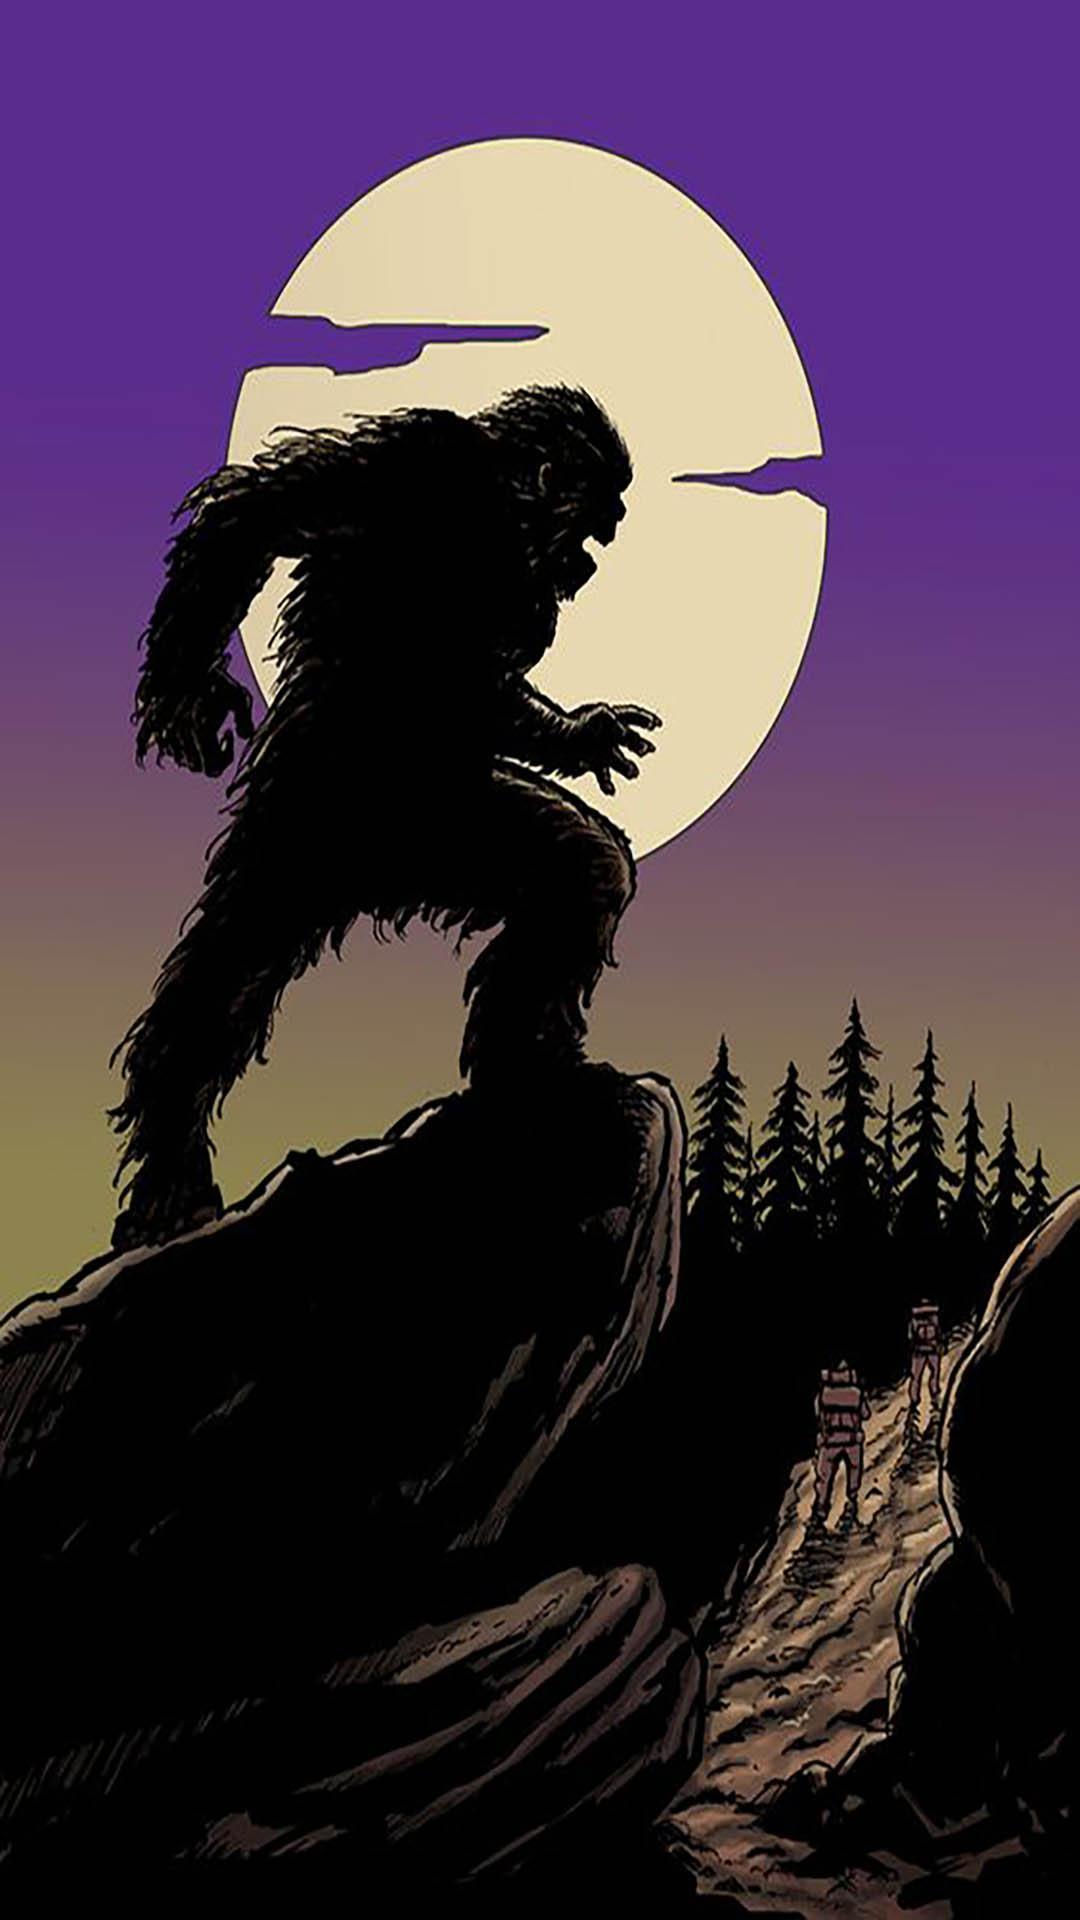 download the new for android Bigfoot Monster - Yeti Hunter